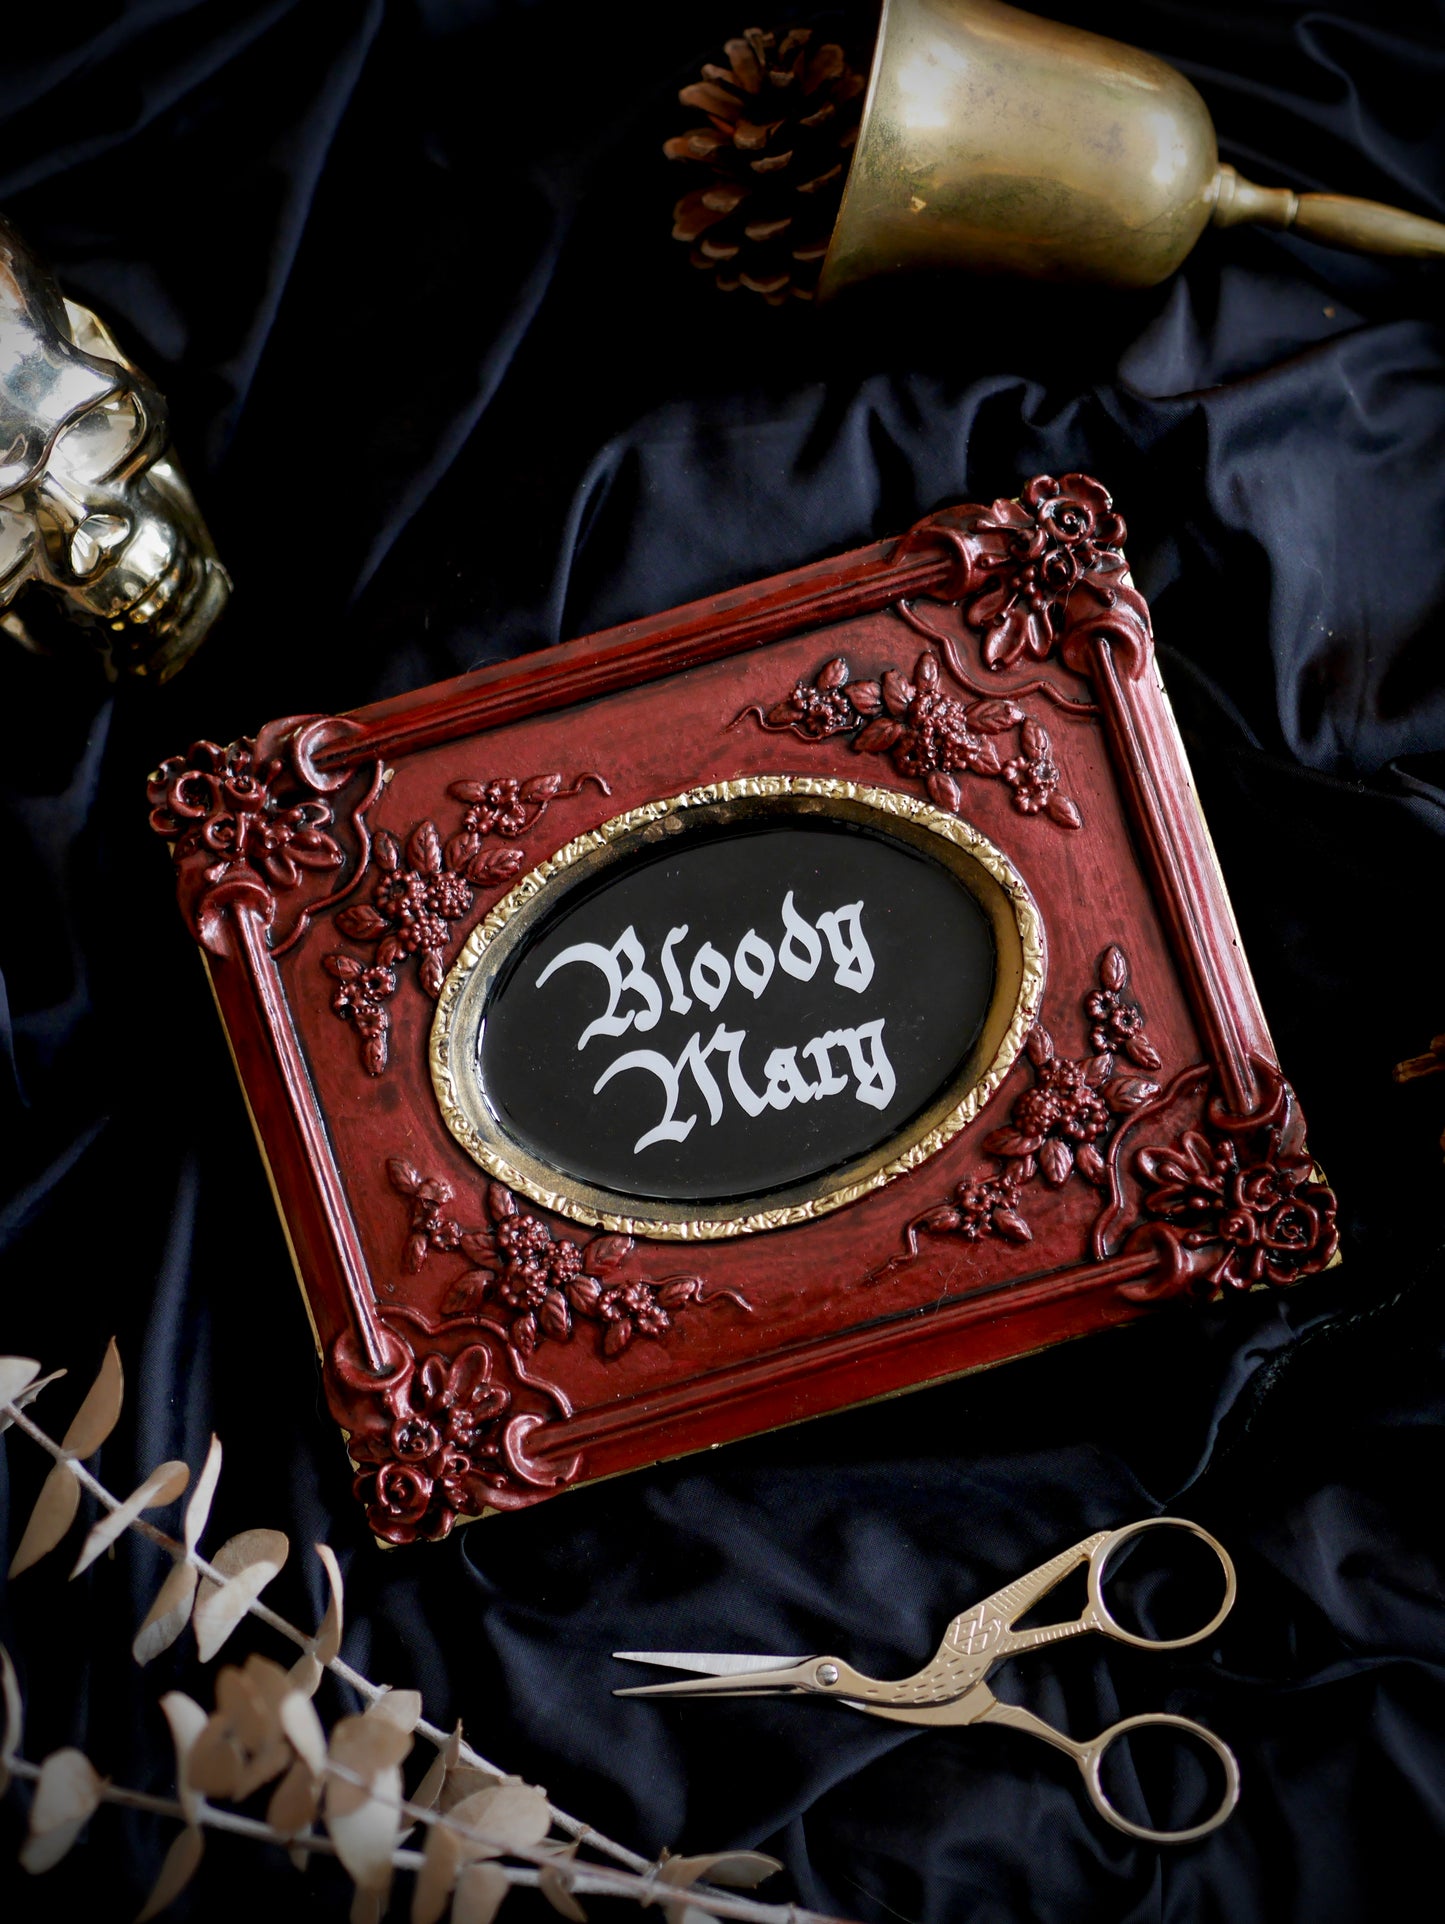 Bloody Mary – Wall Plaque